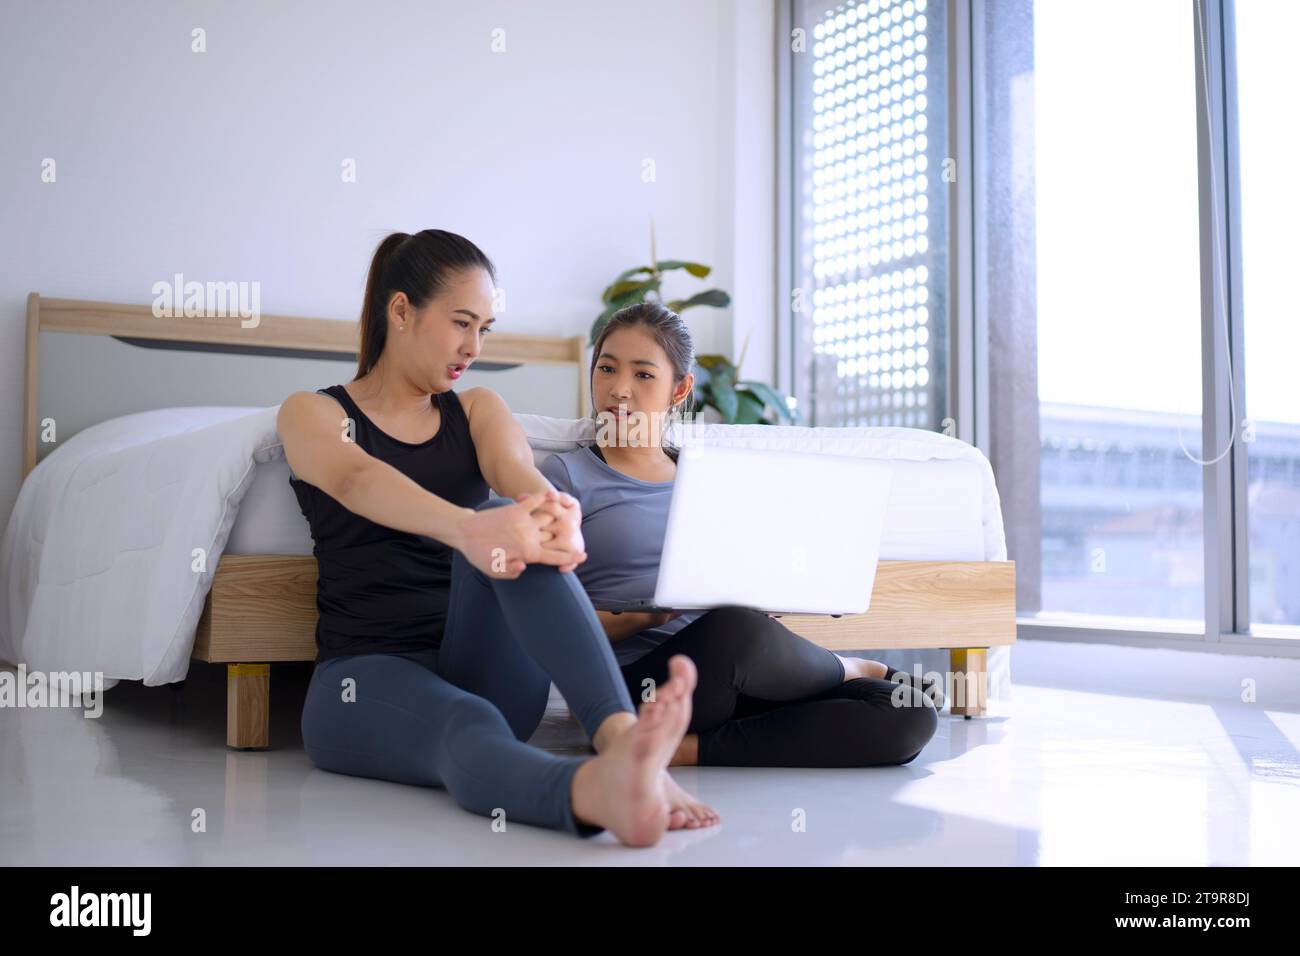 Two women paly yoga at home. Healthy lifestyle and leisure concept. Stock Photo